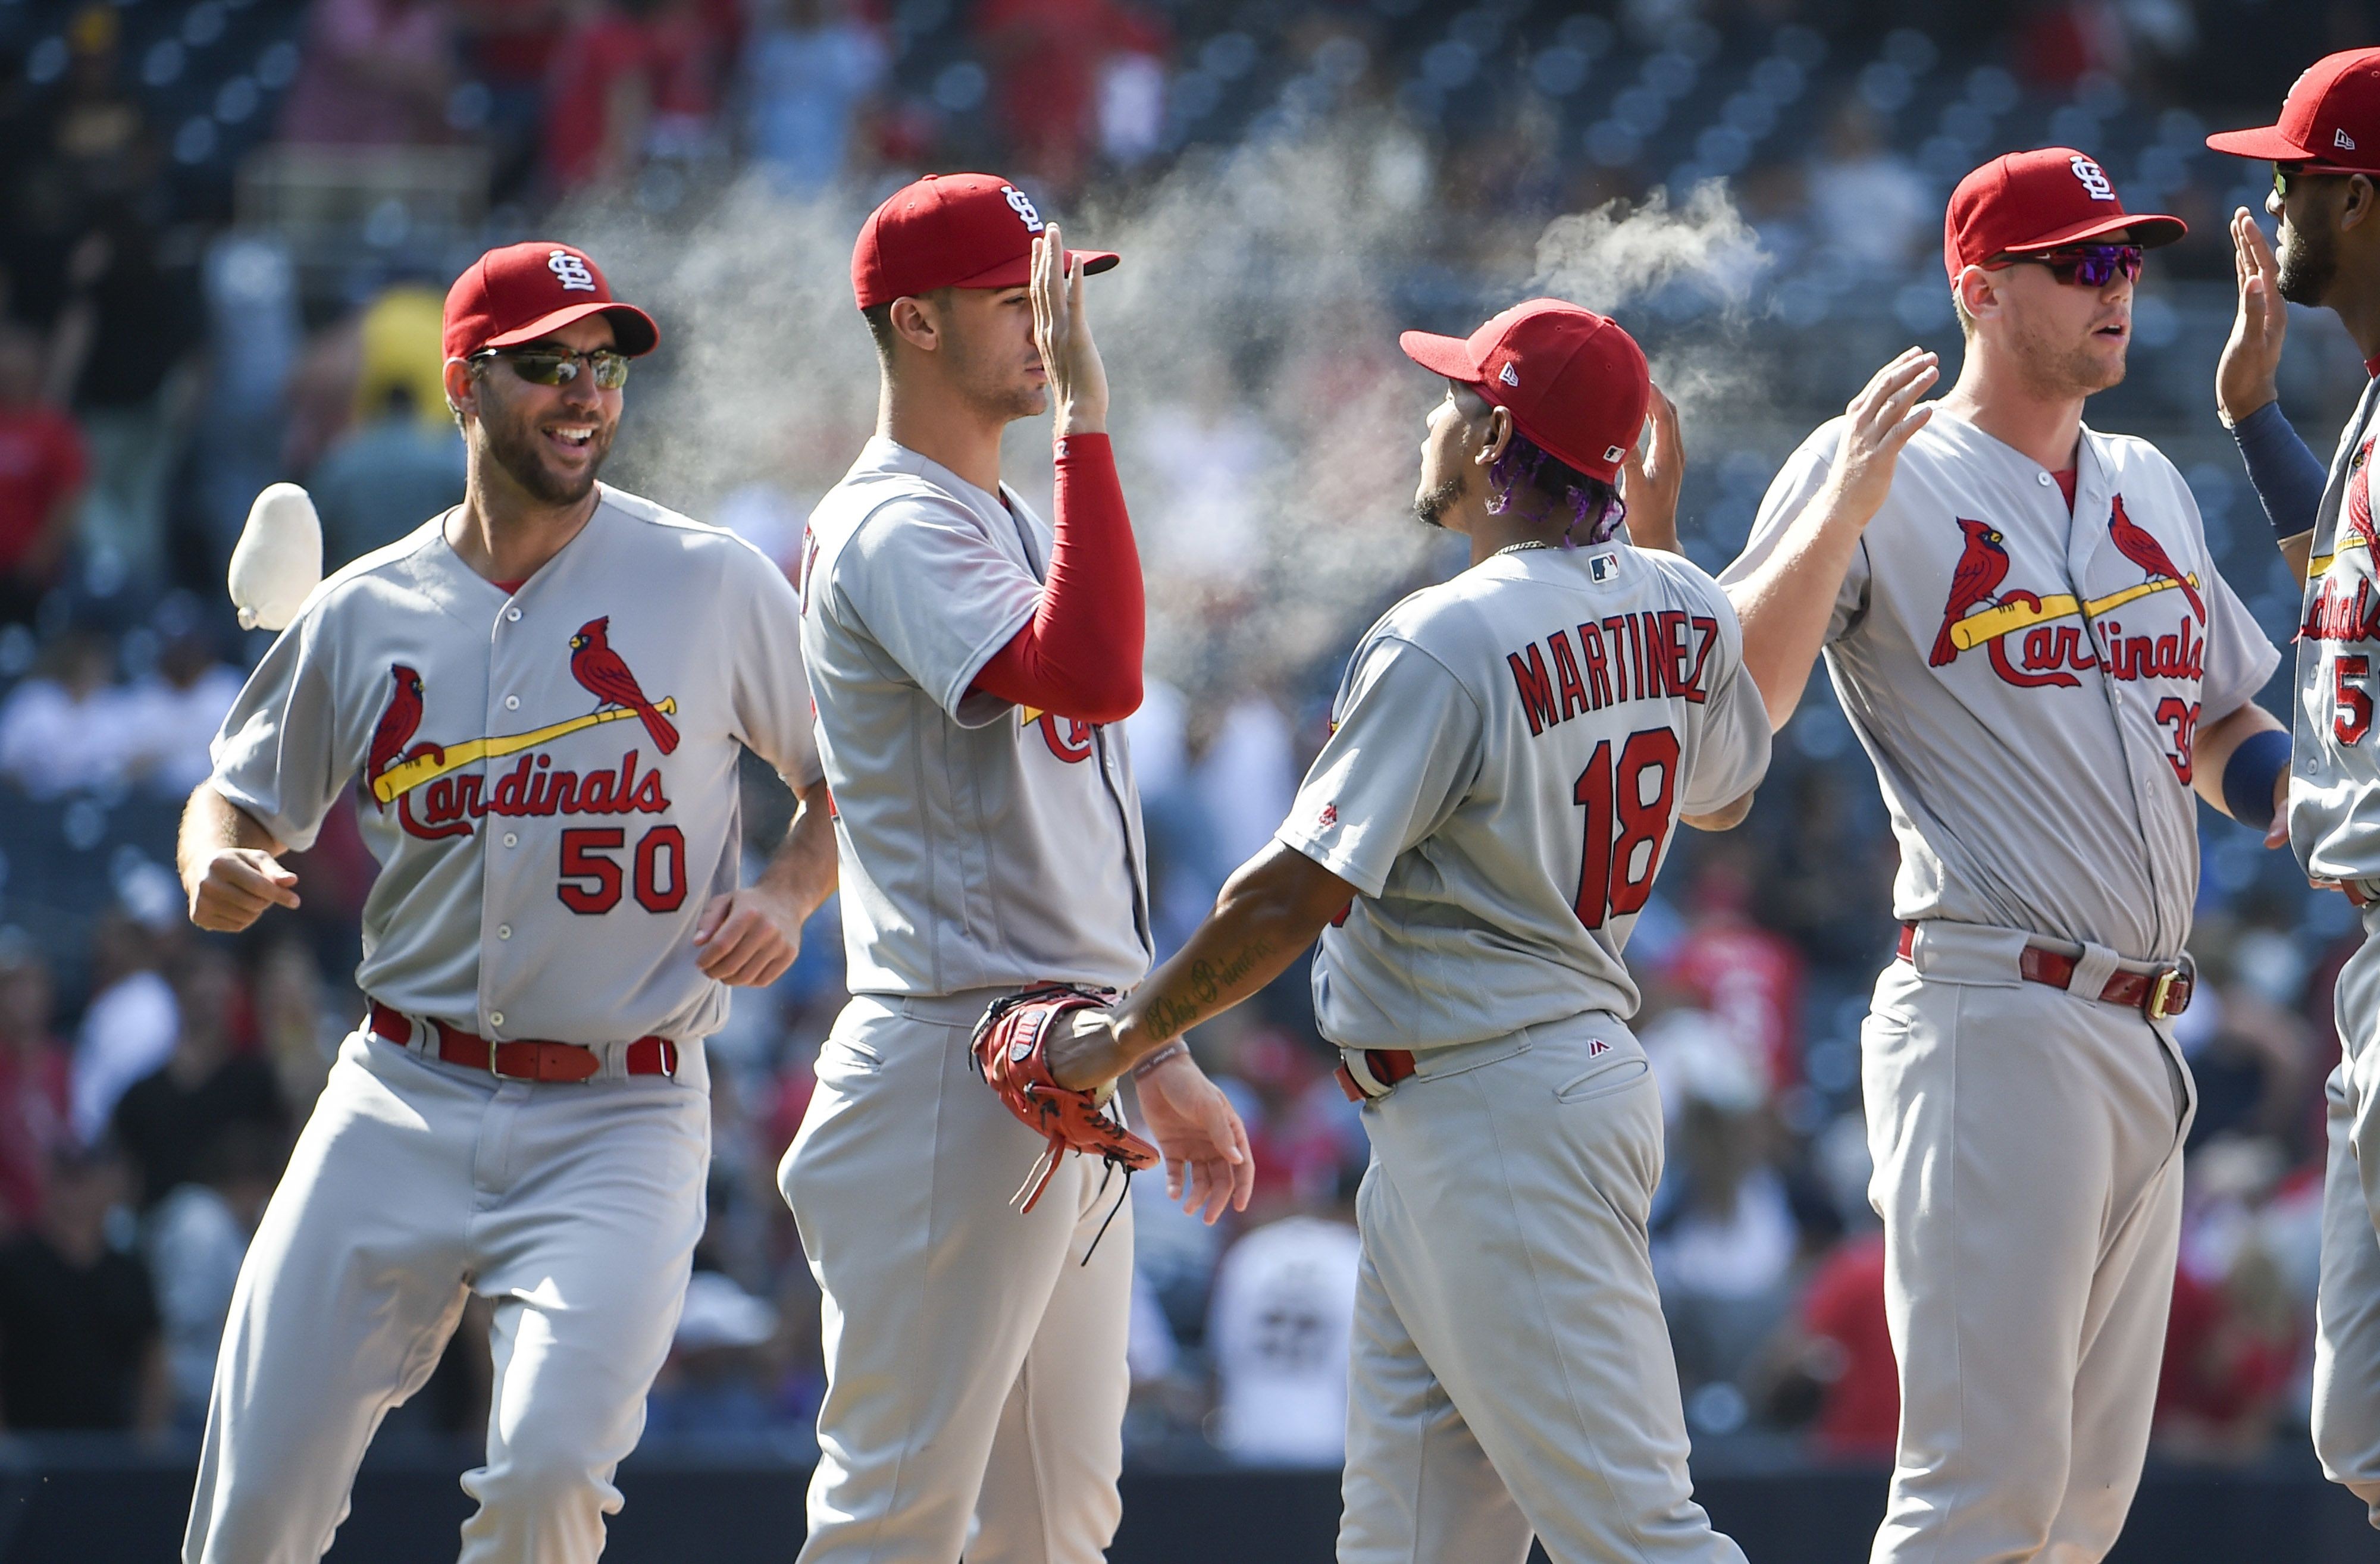 St. Louis Cardinals: USA Today’s 2018 projections